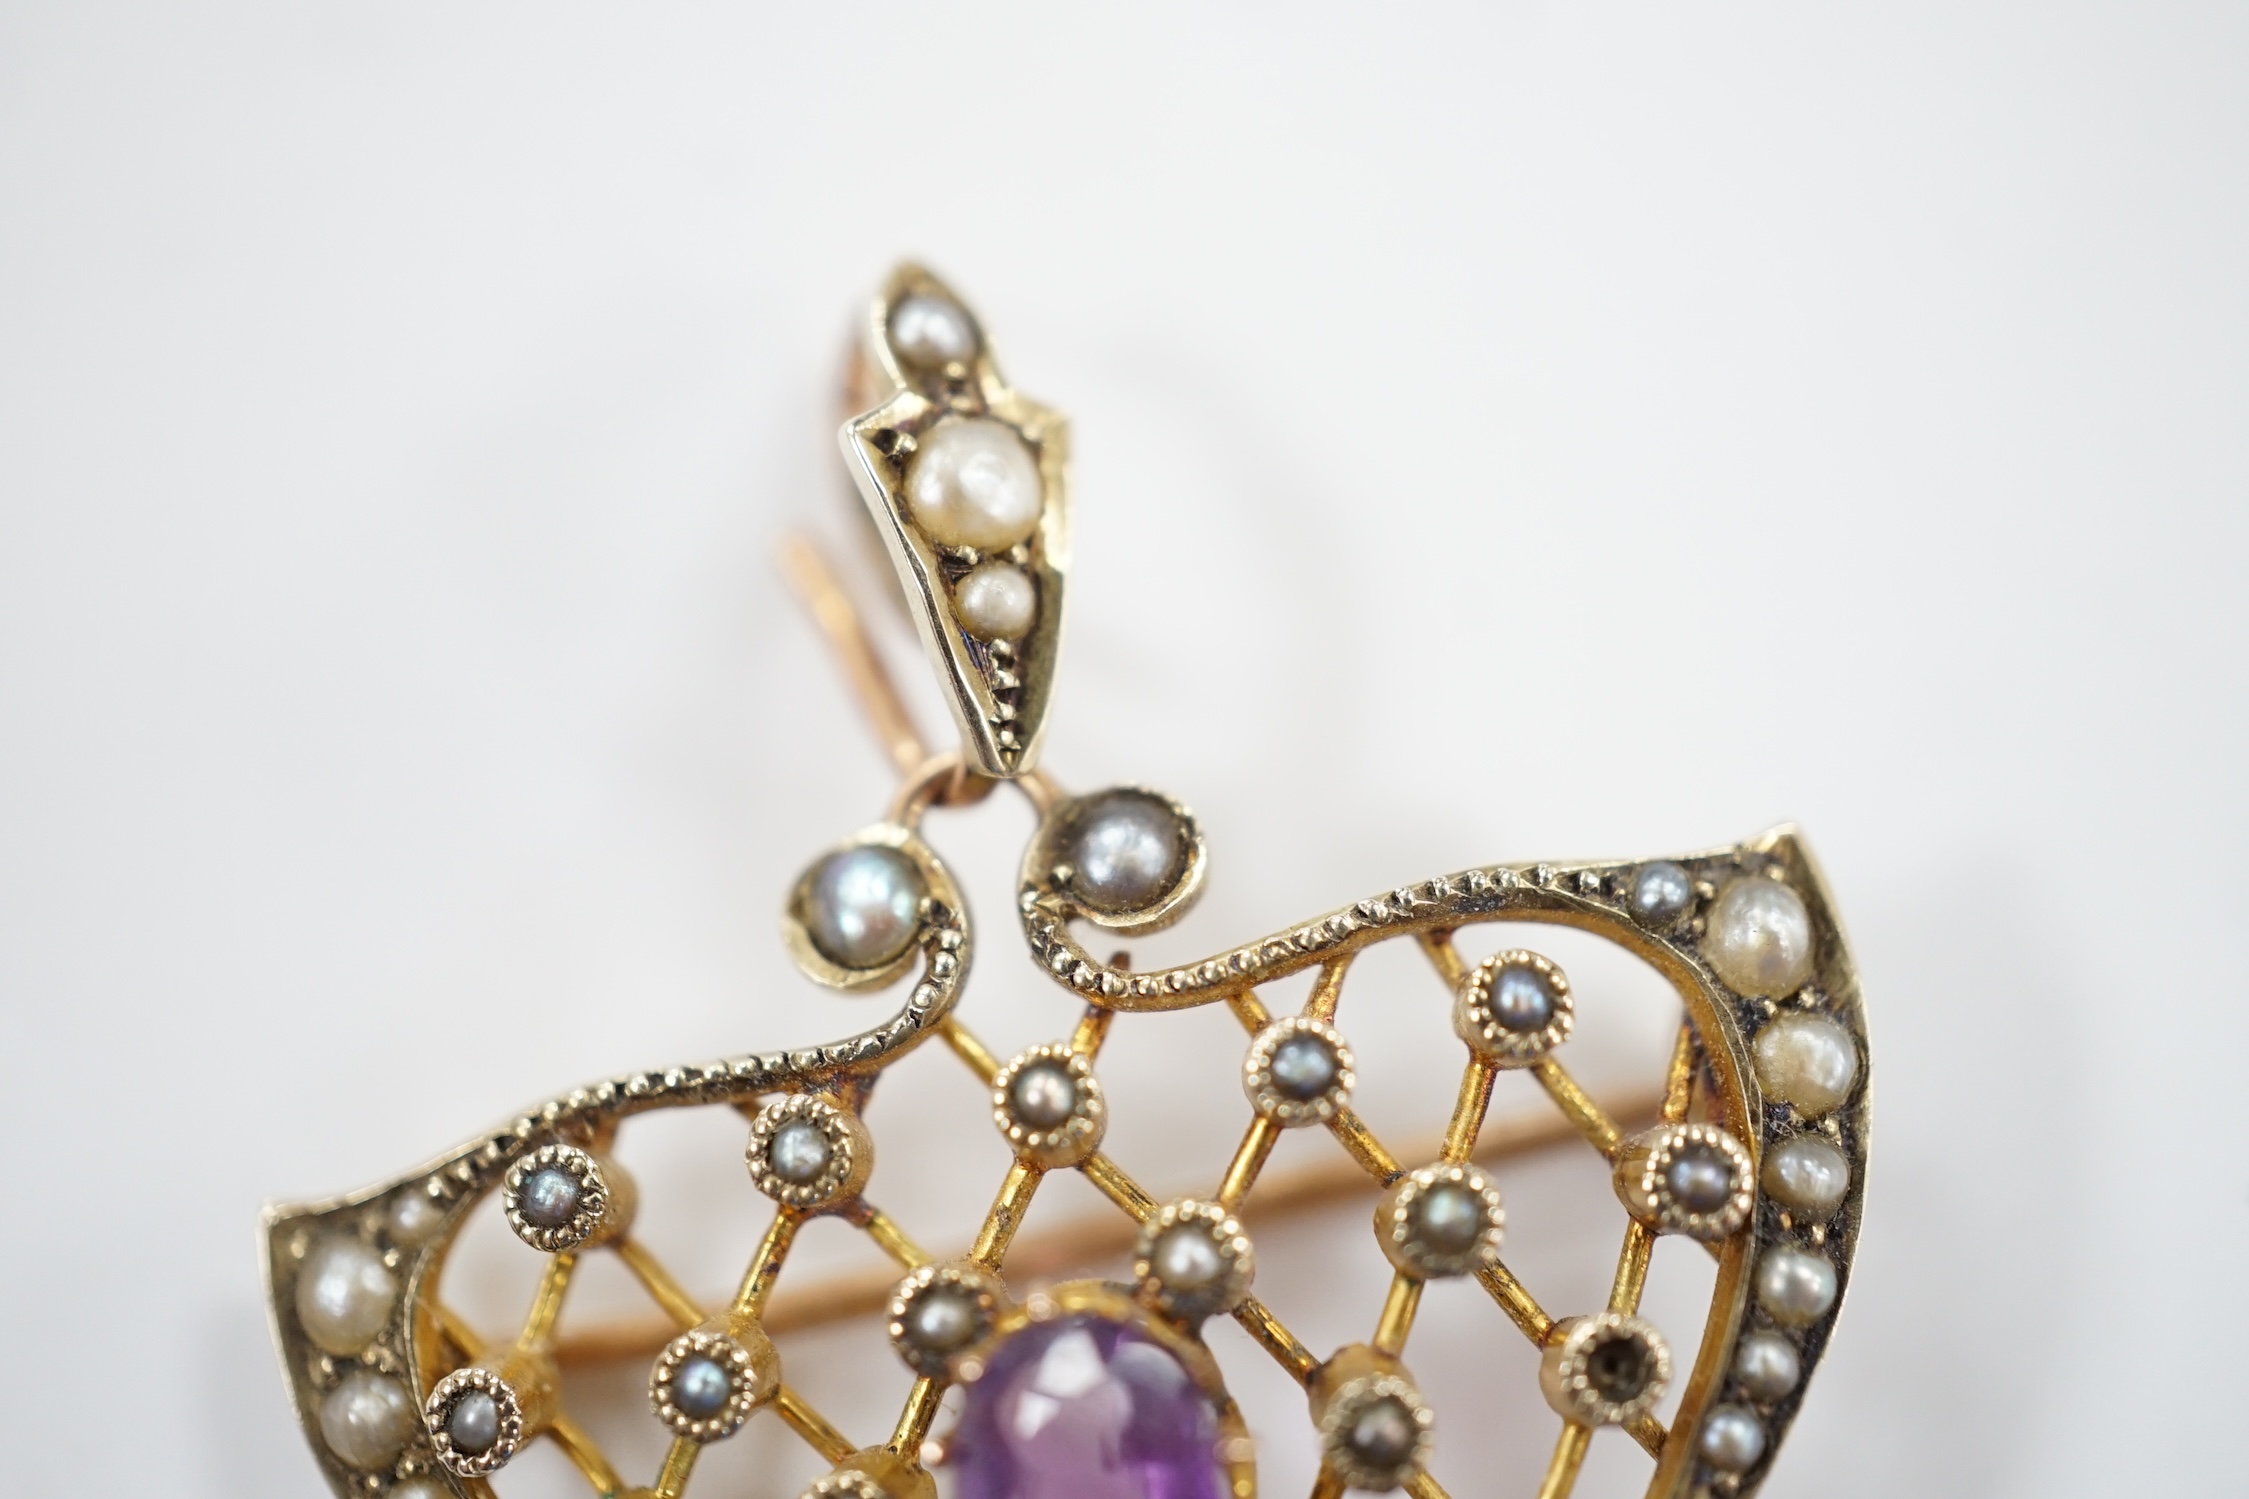 An Edwardian Art Nouveau 9ct, amethyst and seed pearl set drop pendant, 50mm, gross weight 5.2 - Image 5 of 6